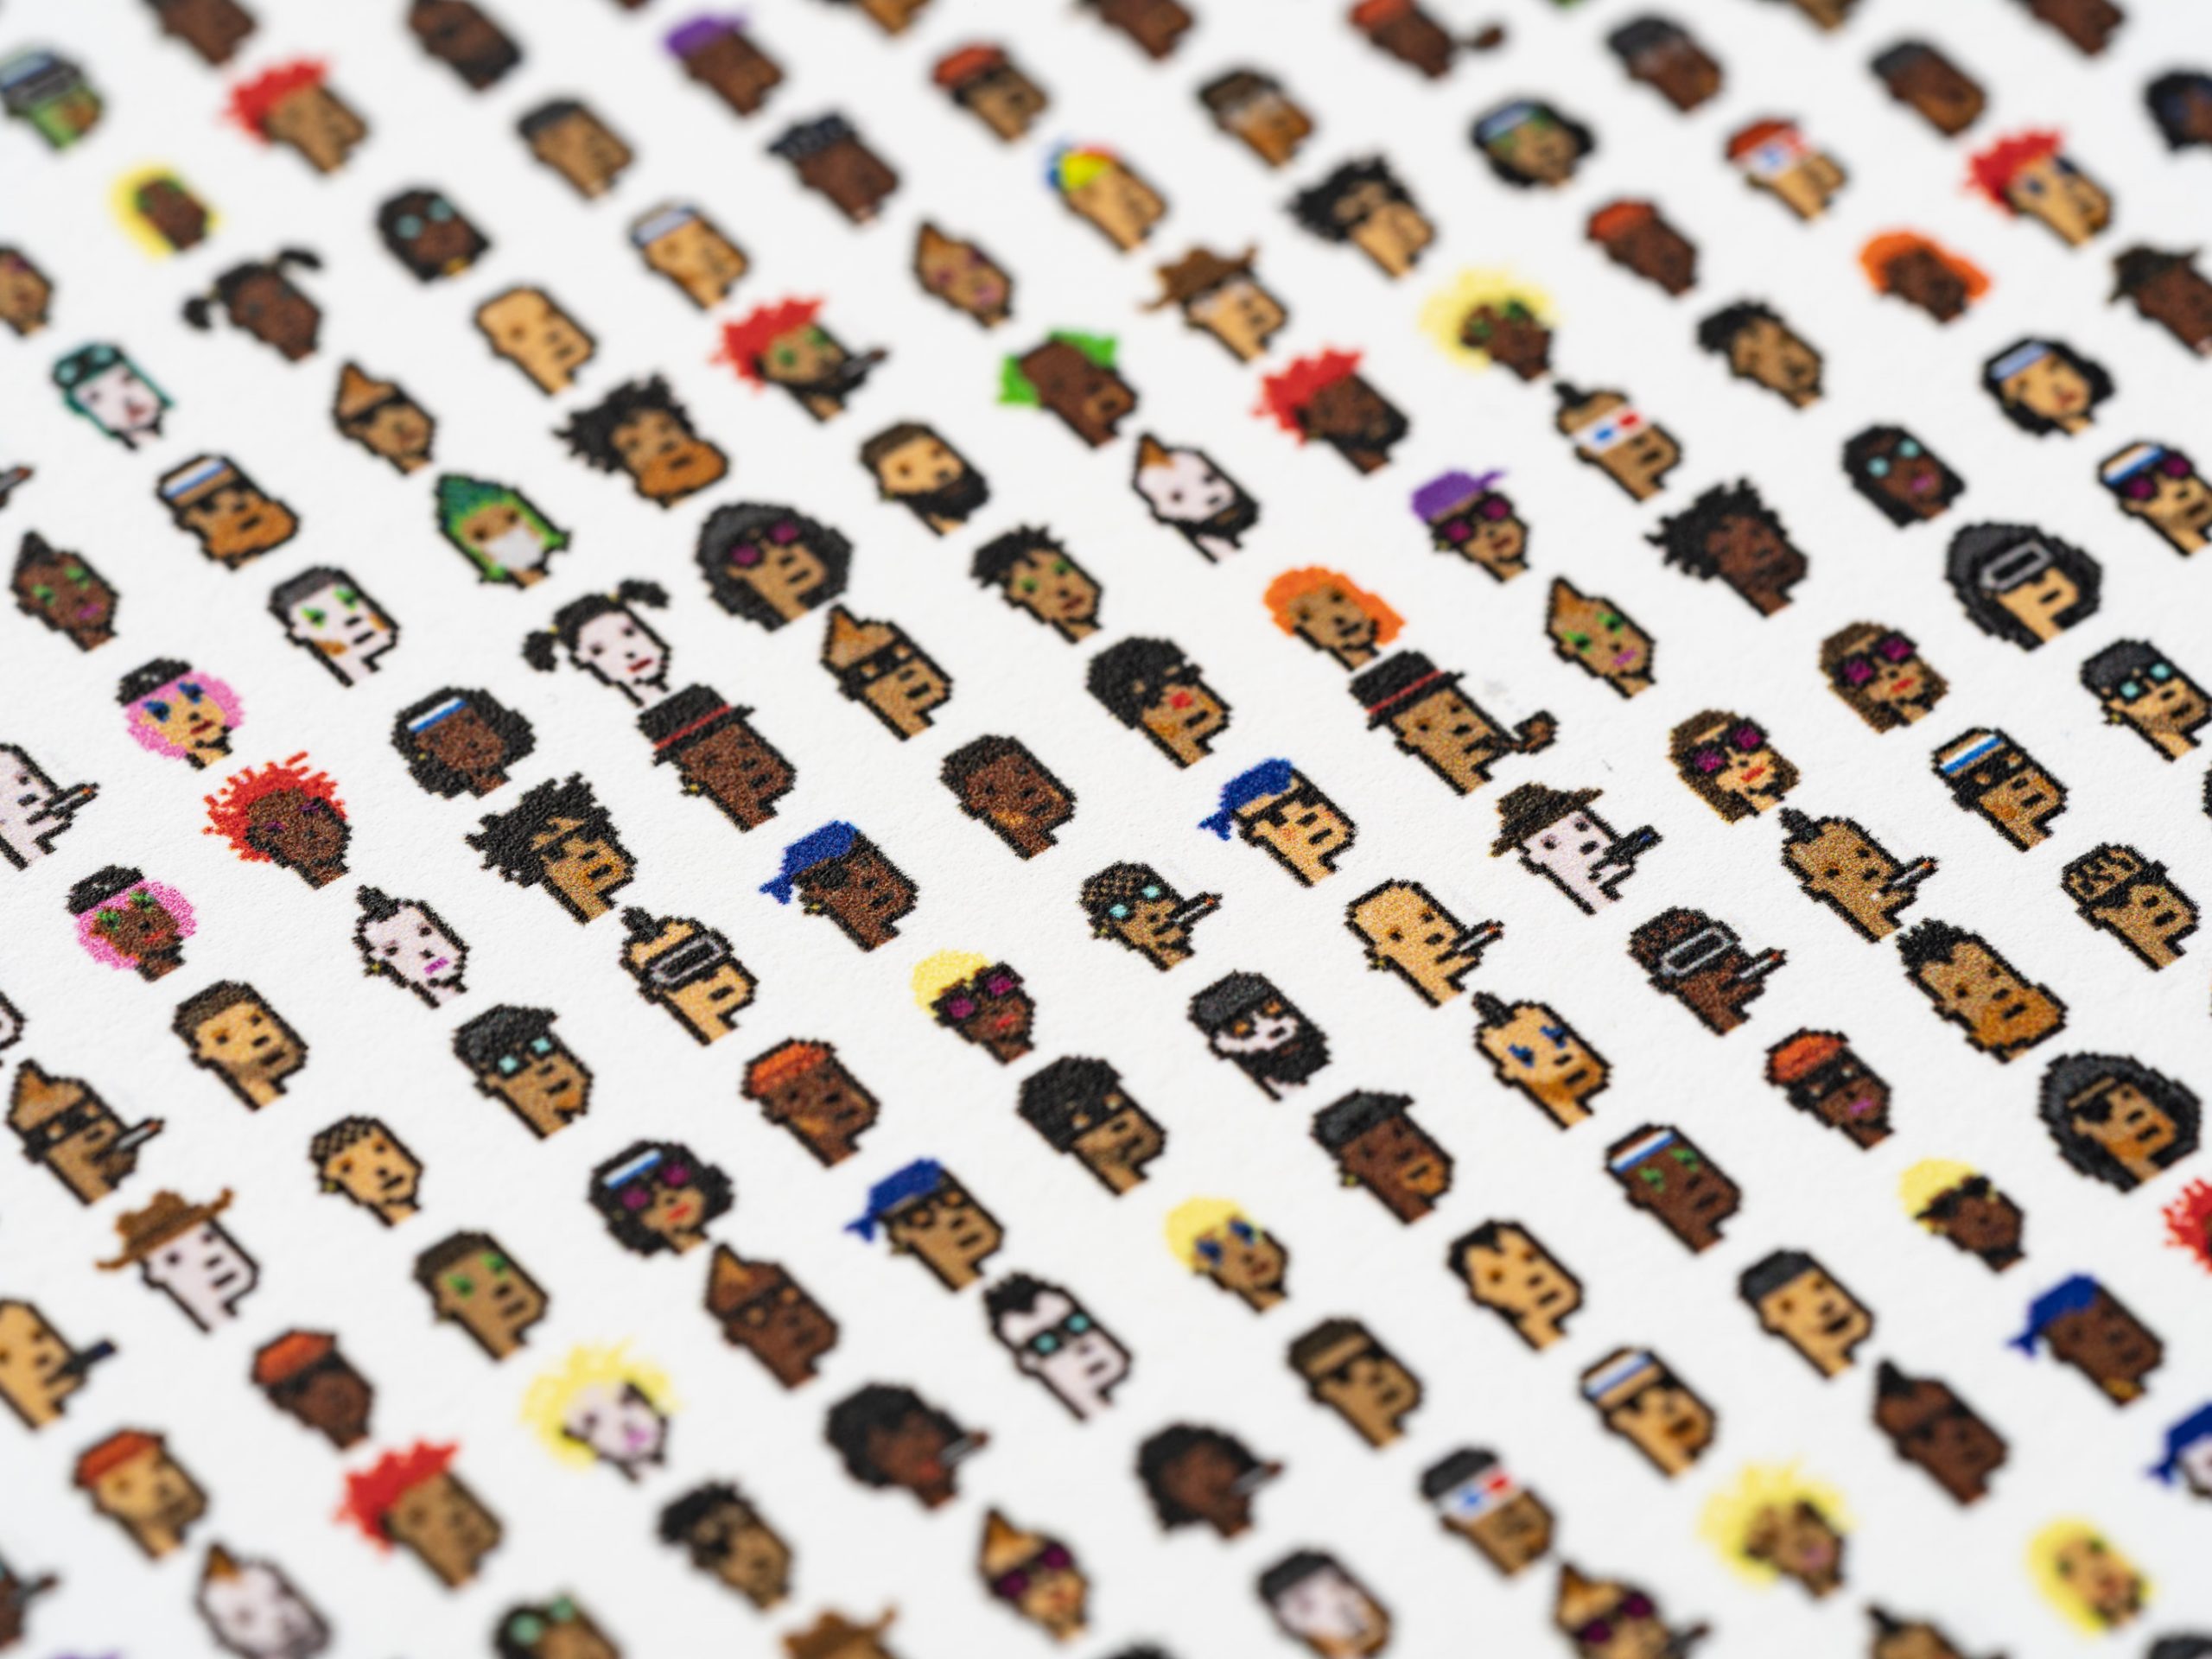 Yuga Labs Is Inviting Owners of CryptoPunks to Purchase Physical